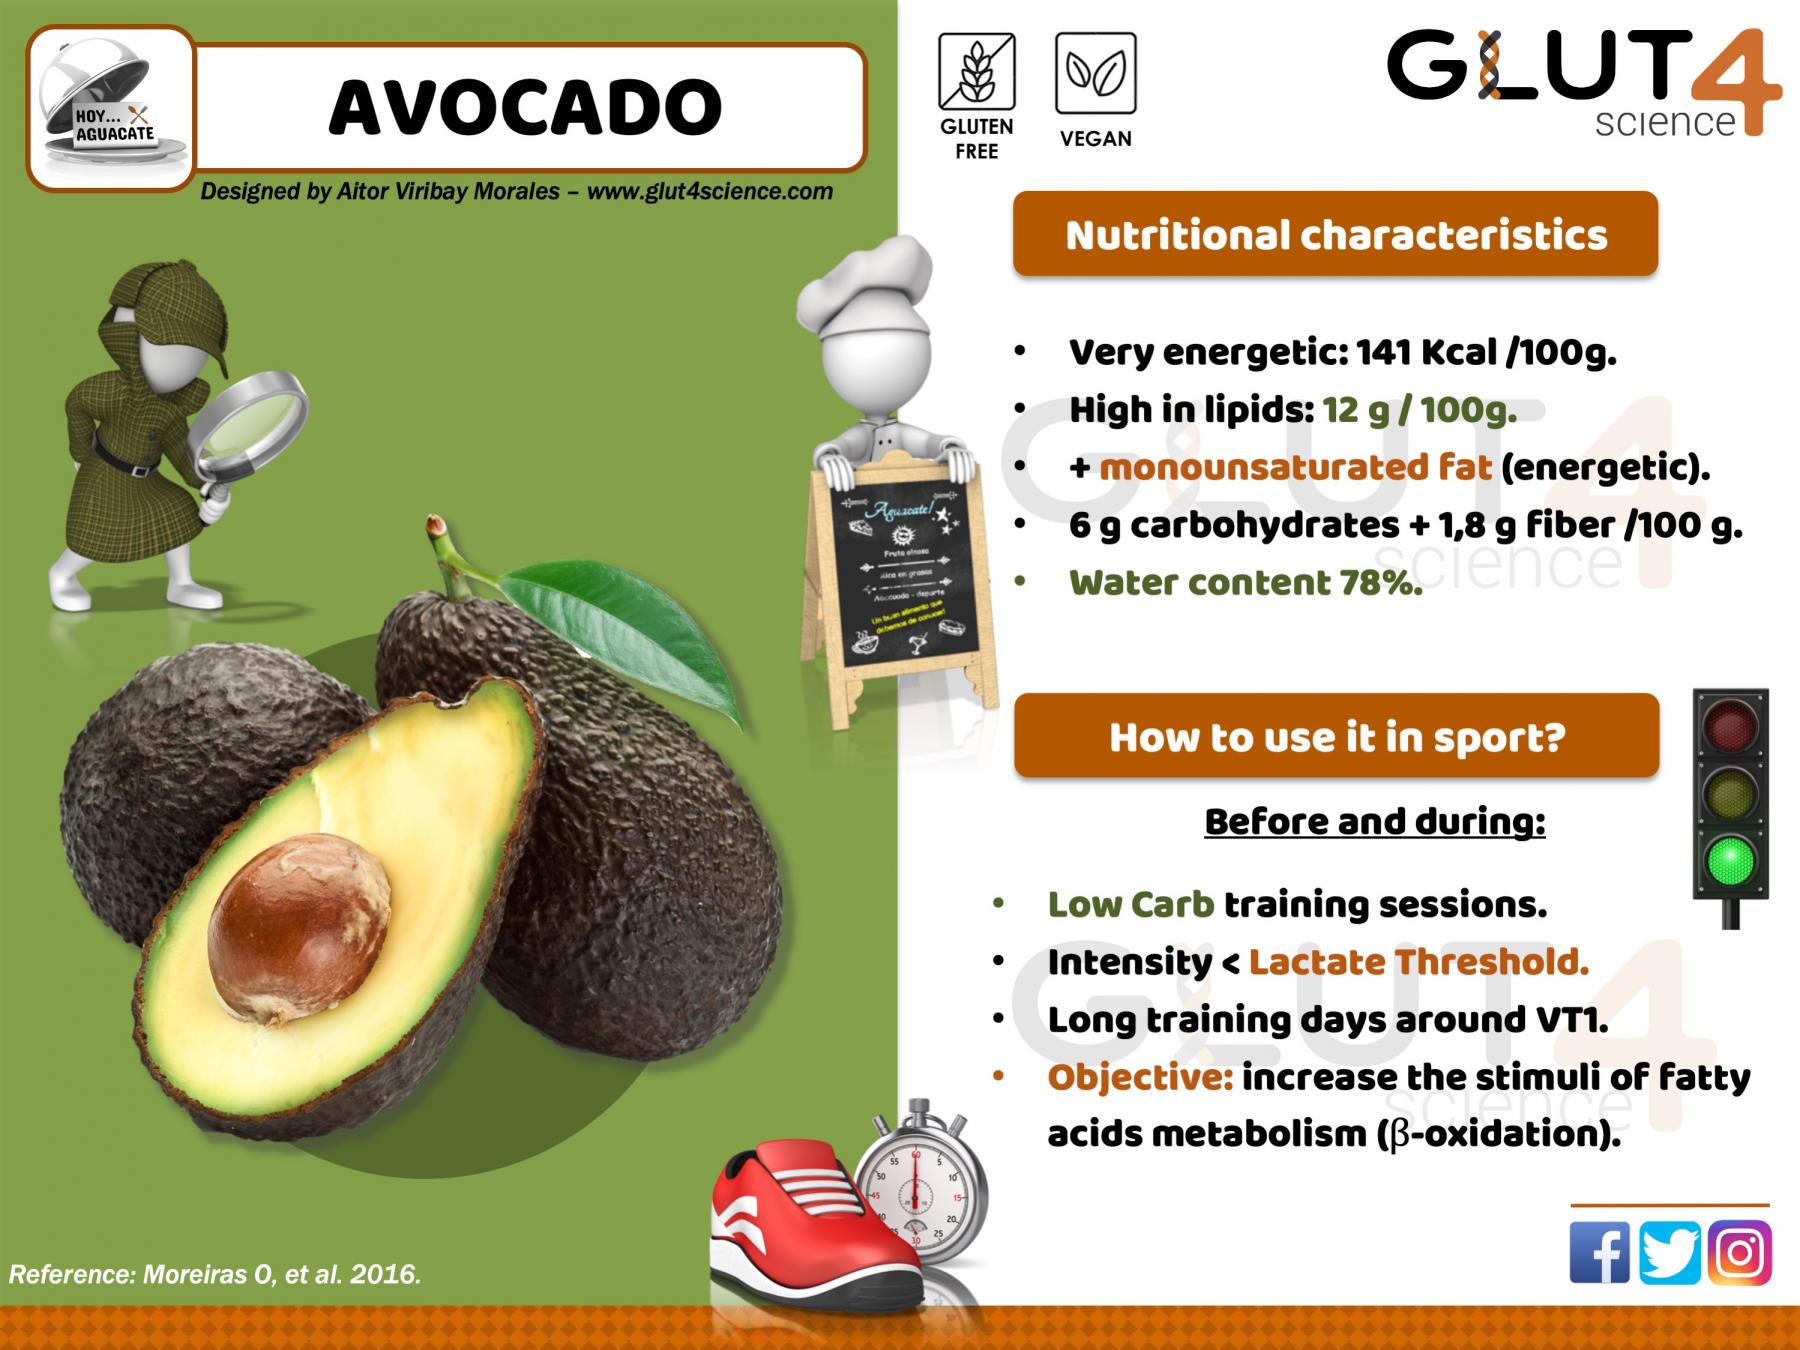 How to use avocado in sport